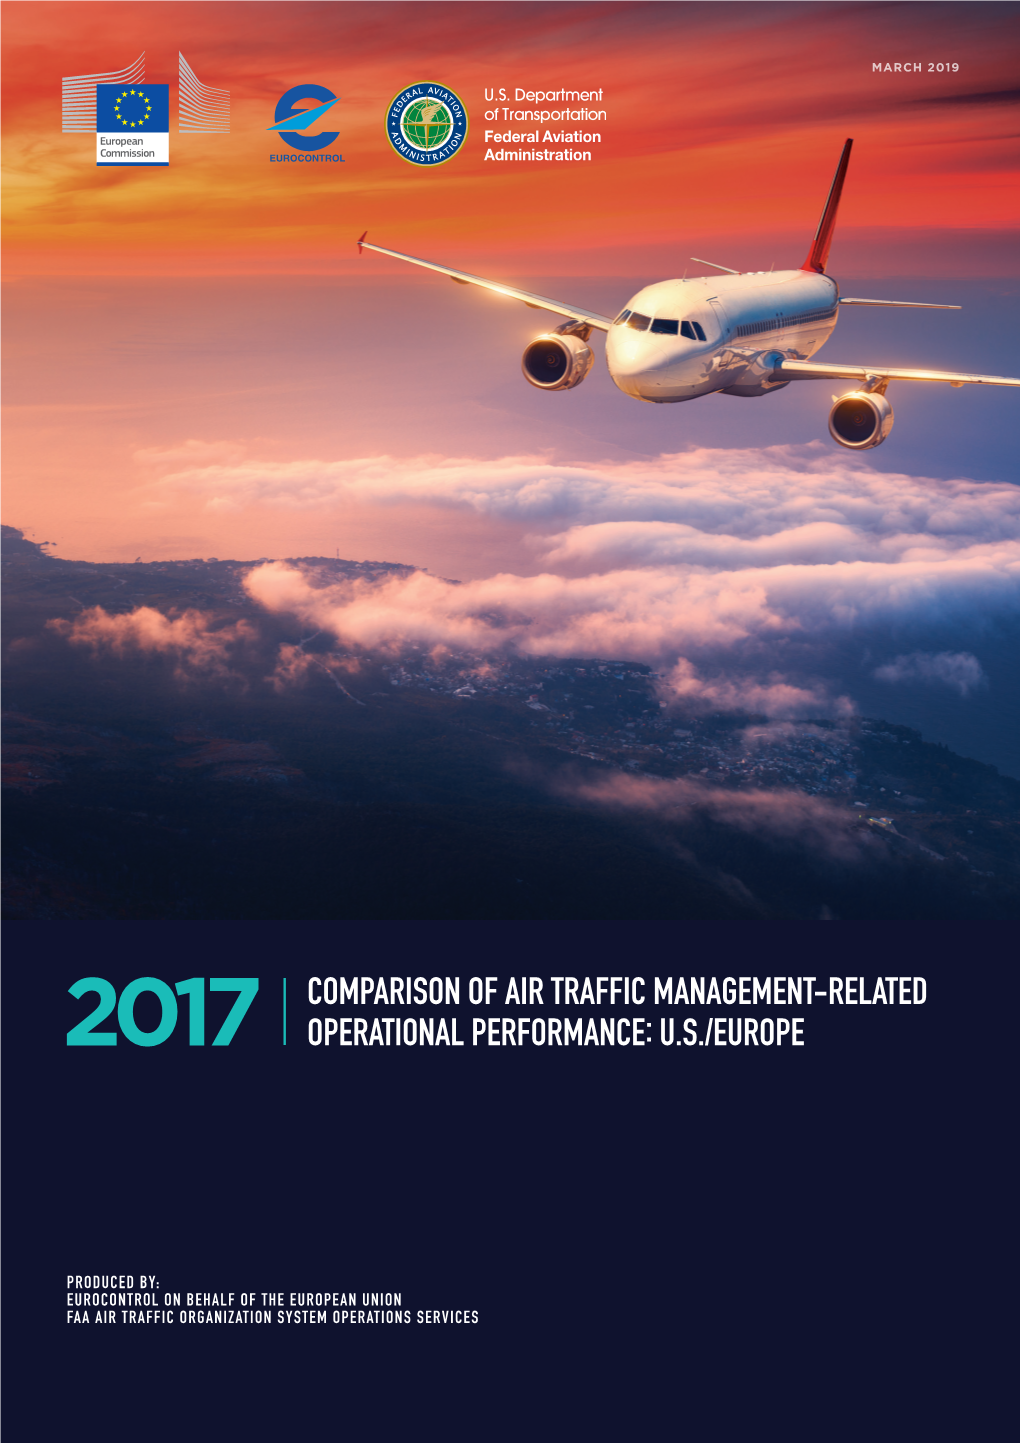 2017 Comparison of Air Traffic Management-Related